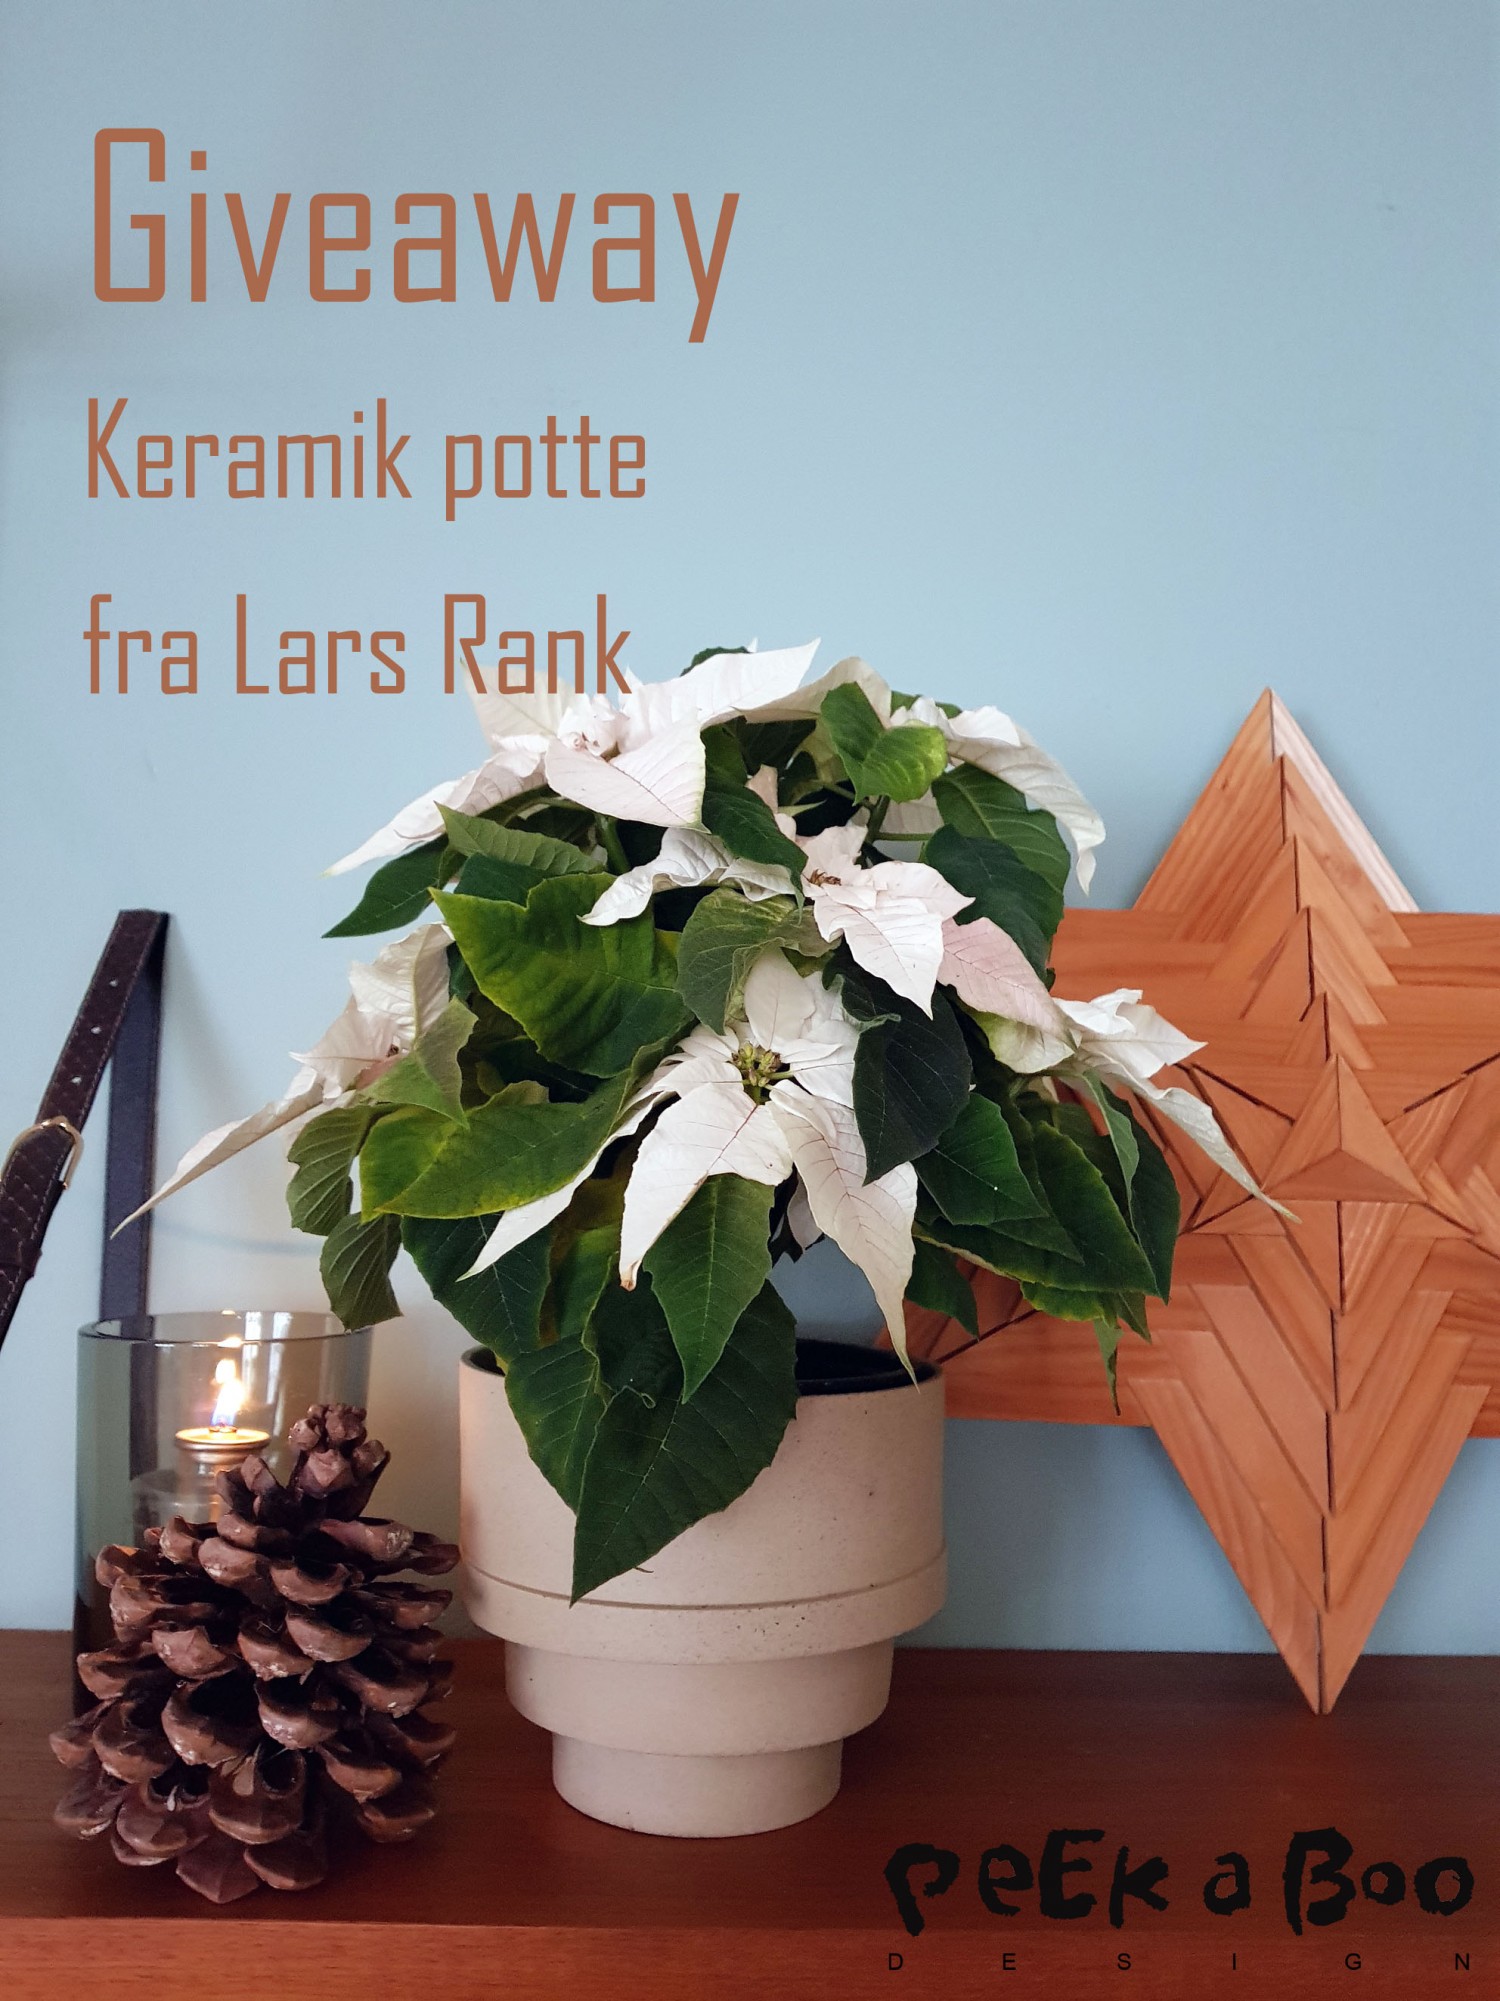 Ceramic Giveaway. You can become the lucky winner of this pretty pot from danish ceramist Lars Rank